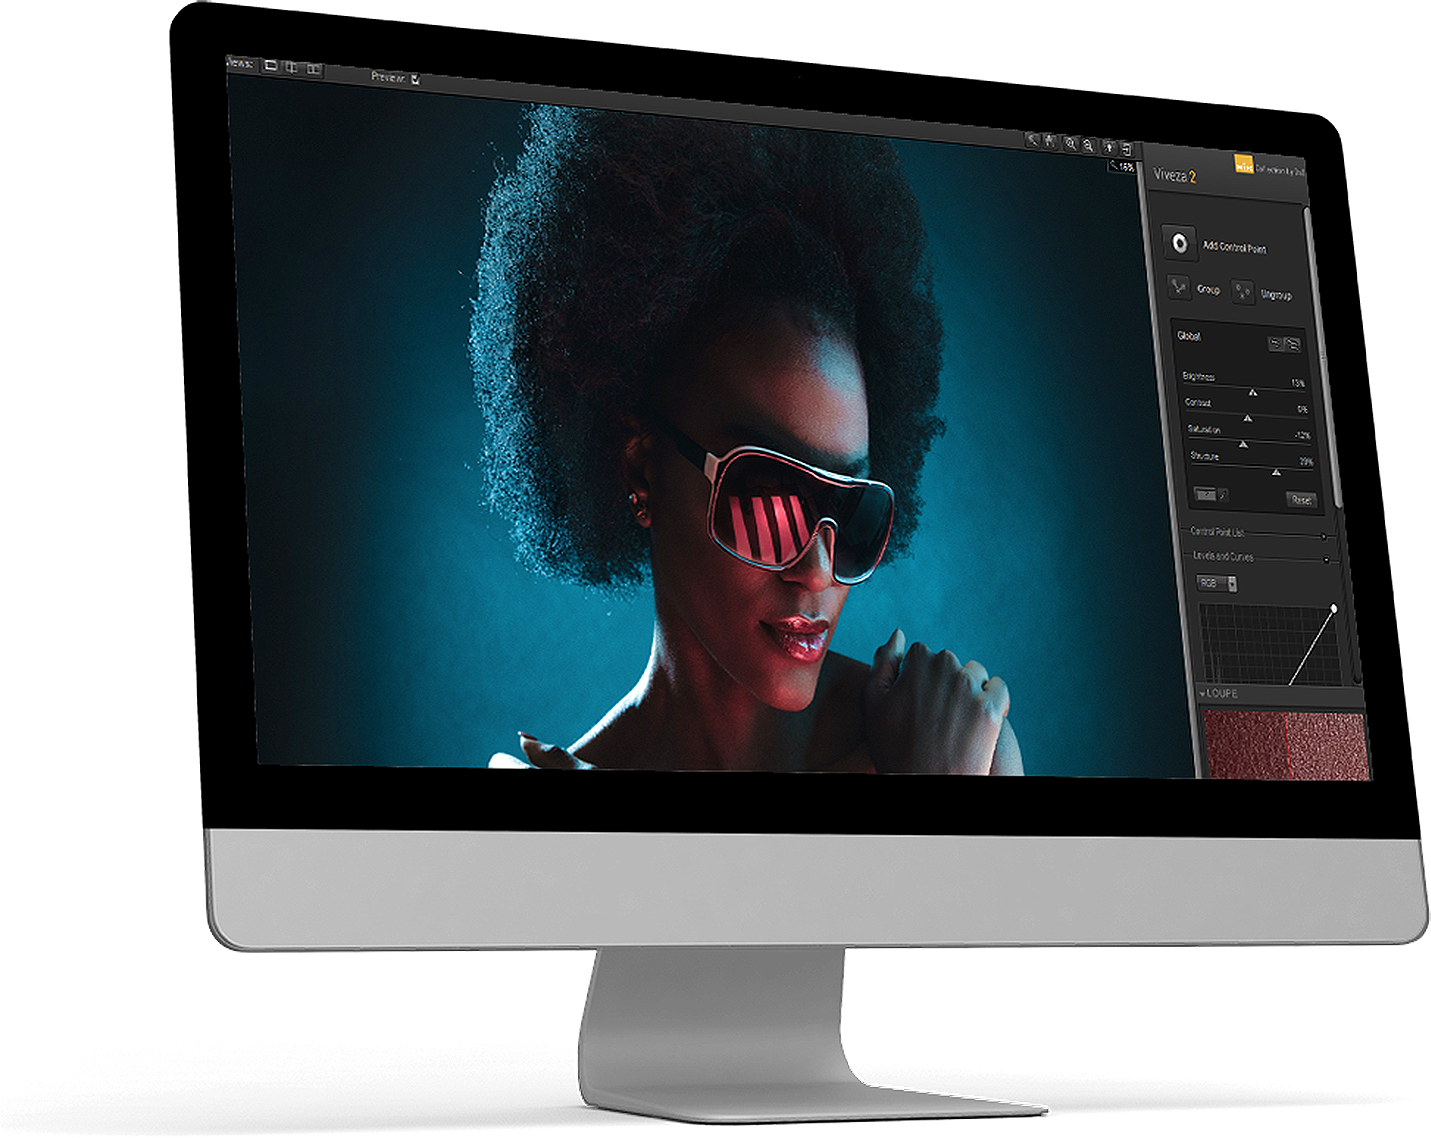 New Nik Collection 3 by DxO - The Most Powerful Photo Editing Plugins